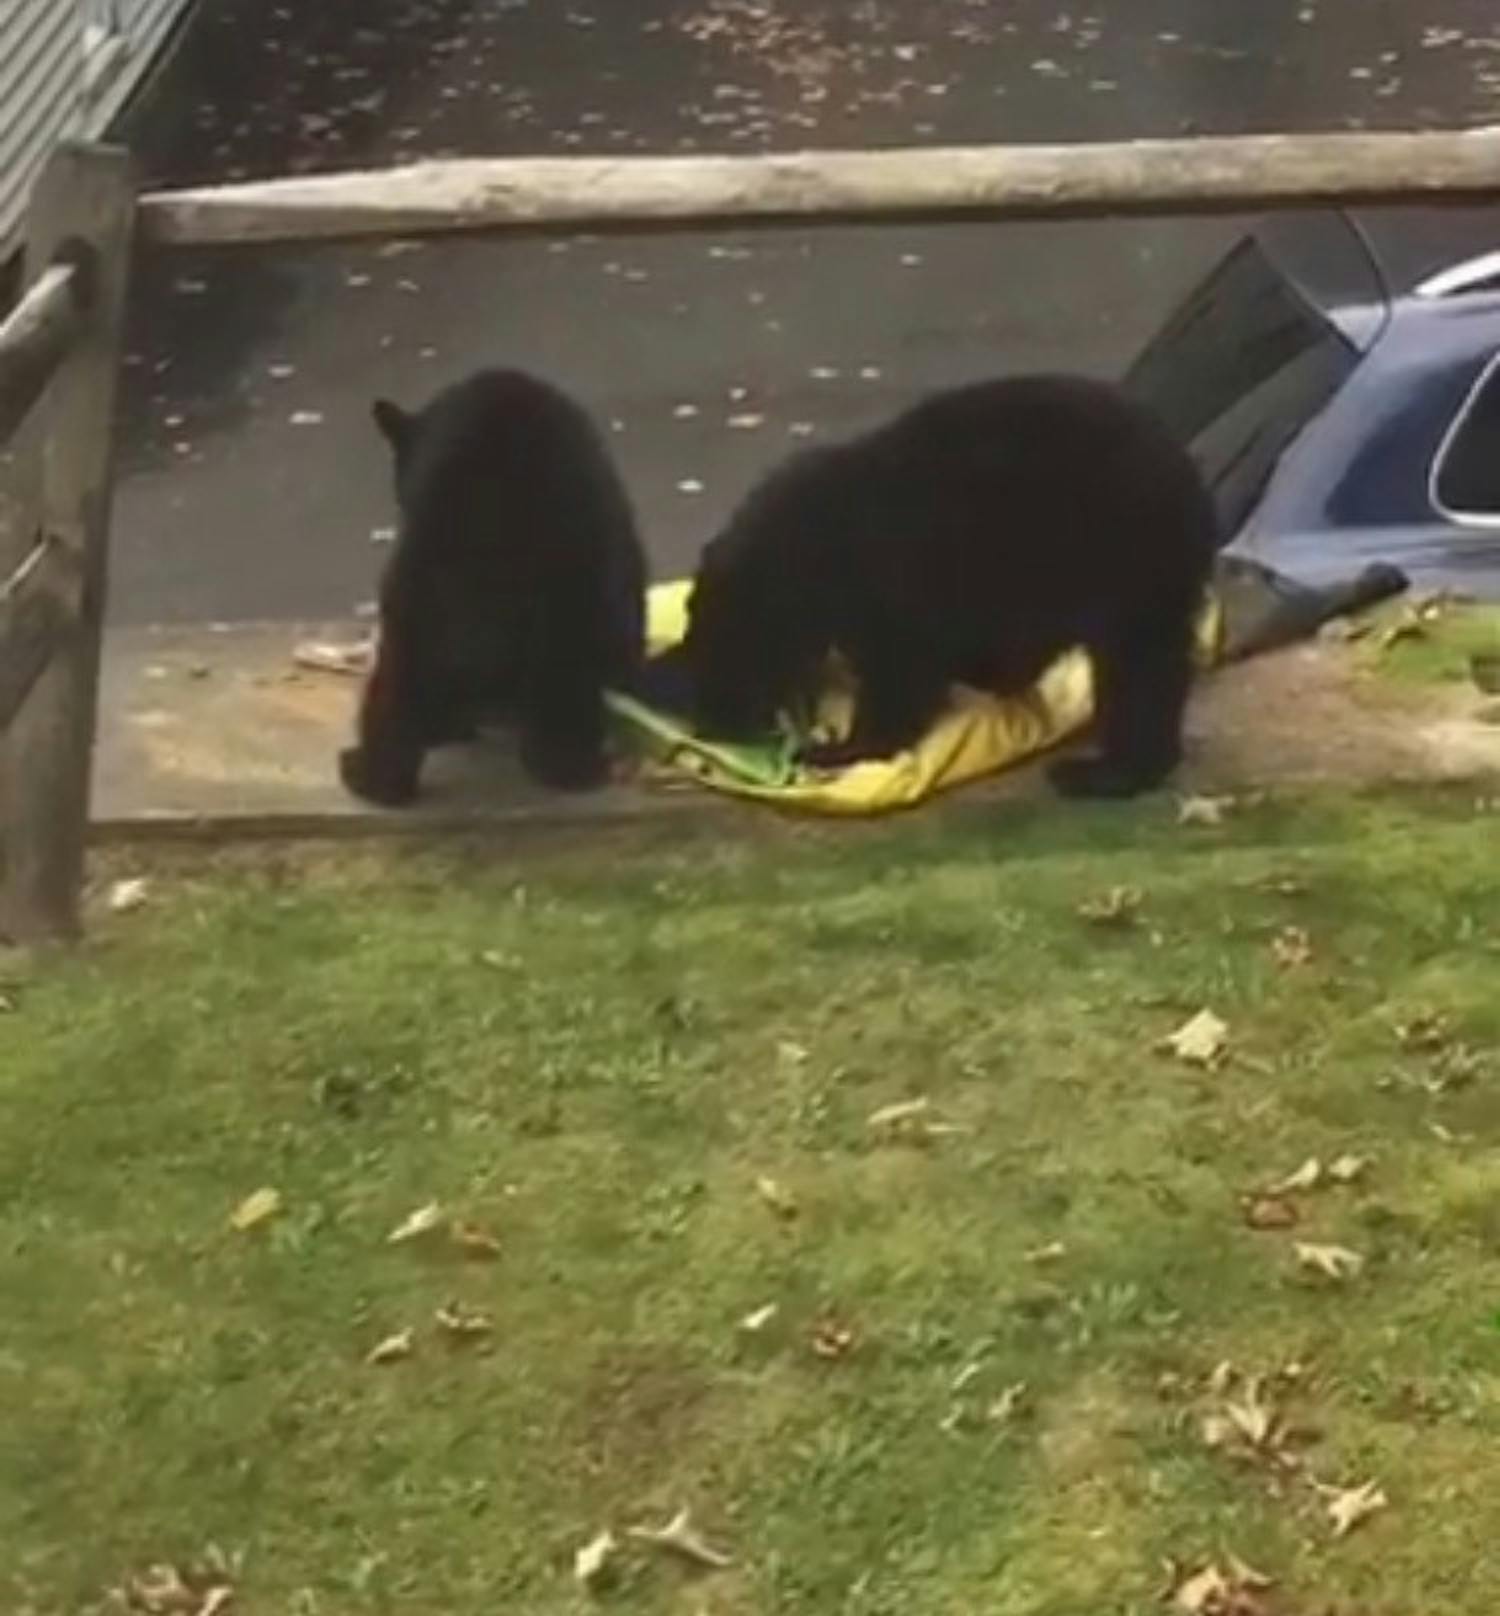 Two black bears were spotted close to campus